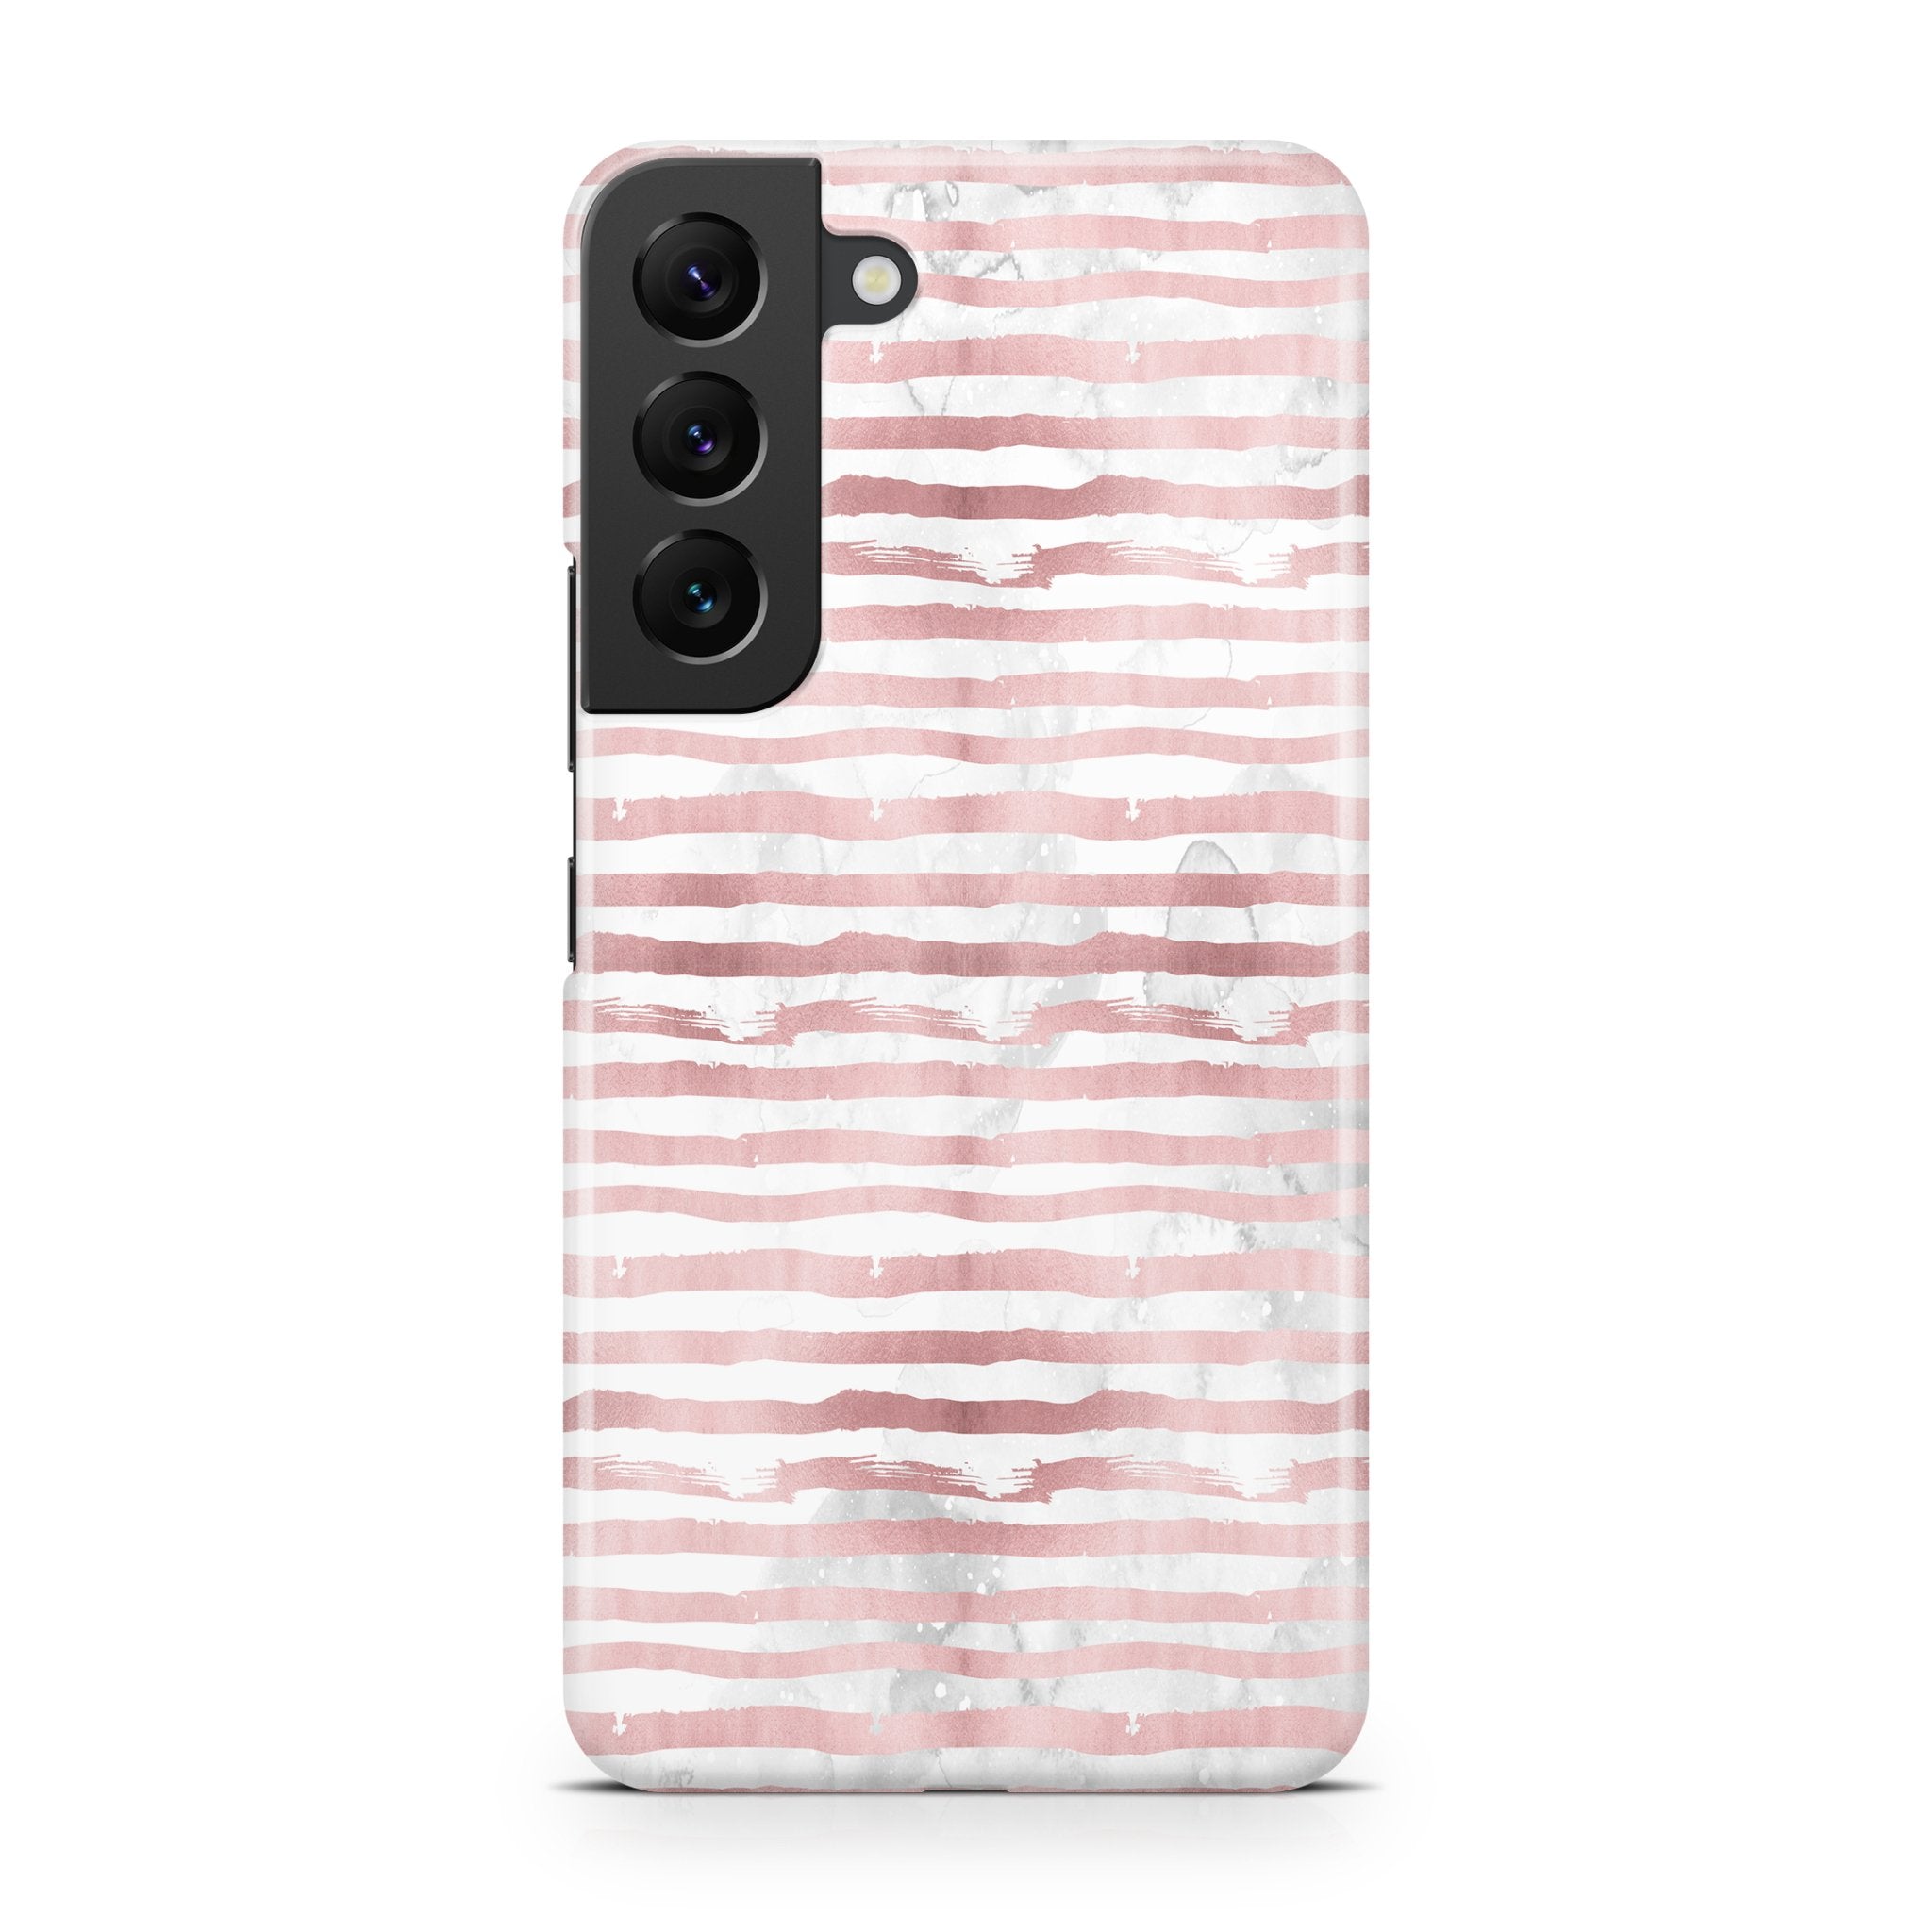 Lipstick Marble - Samsung phone case designs by CaseSwagger